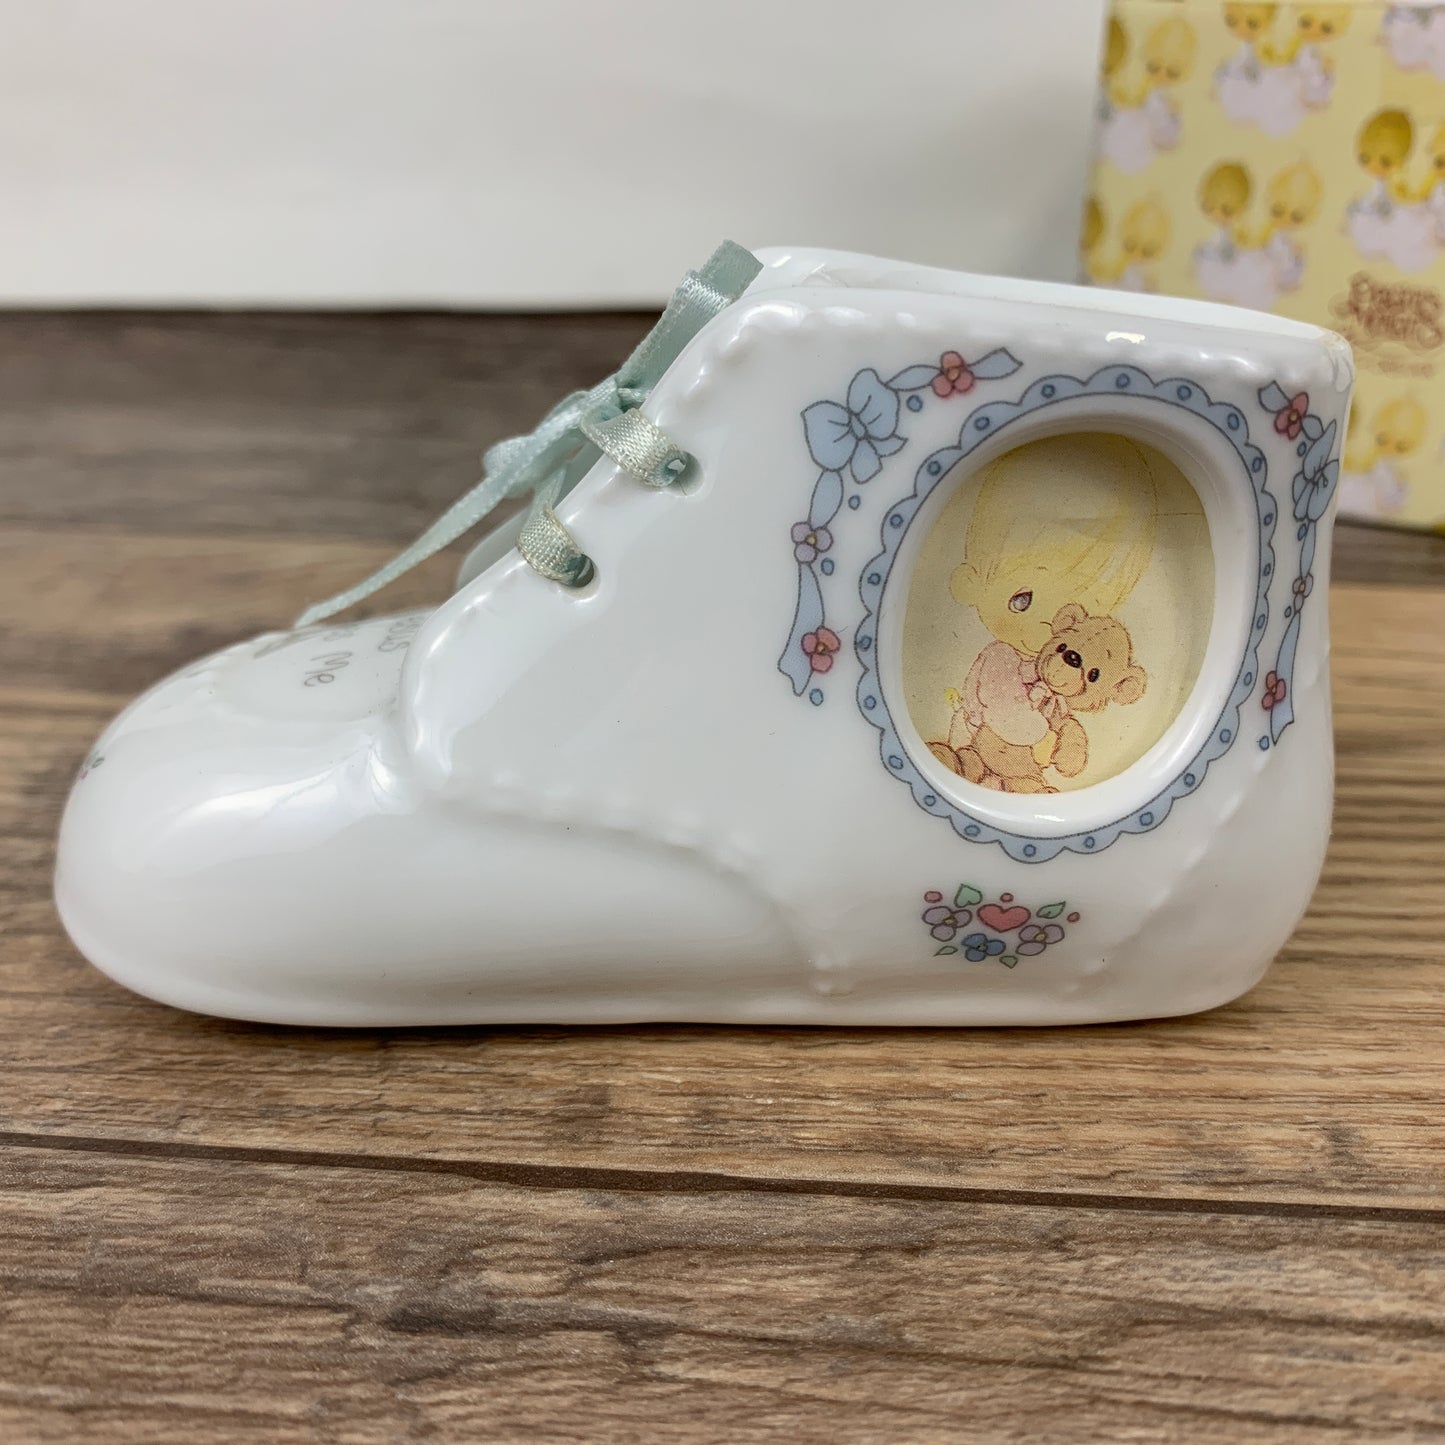 Precious Moments Baby Bootie Shaped Coin Bank, Girl with Bunny, With Original Box